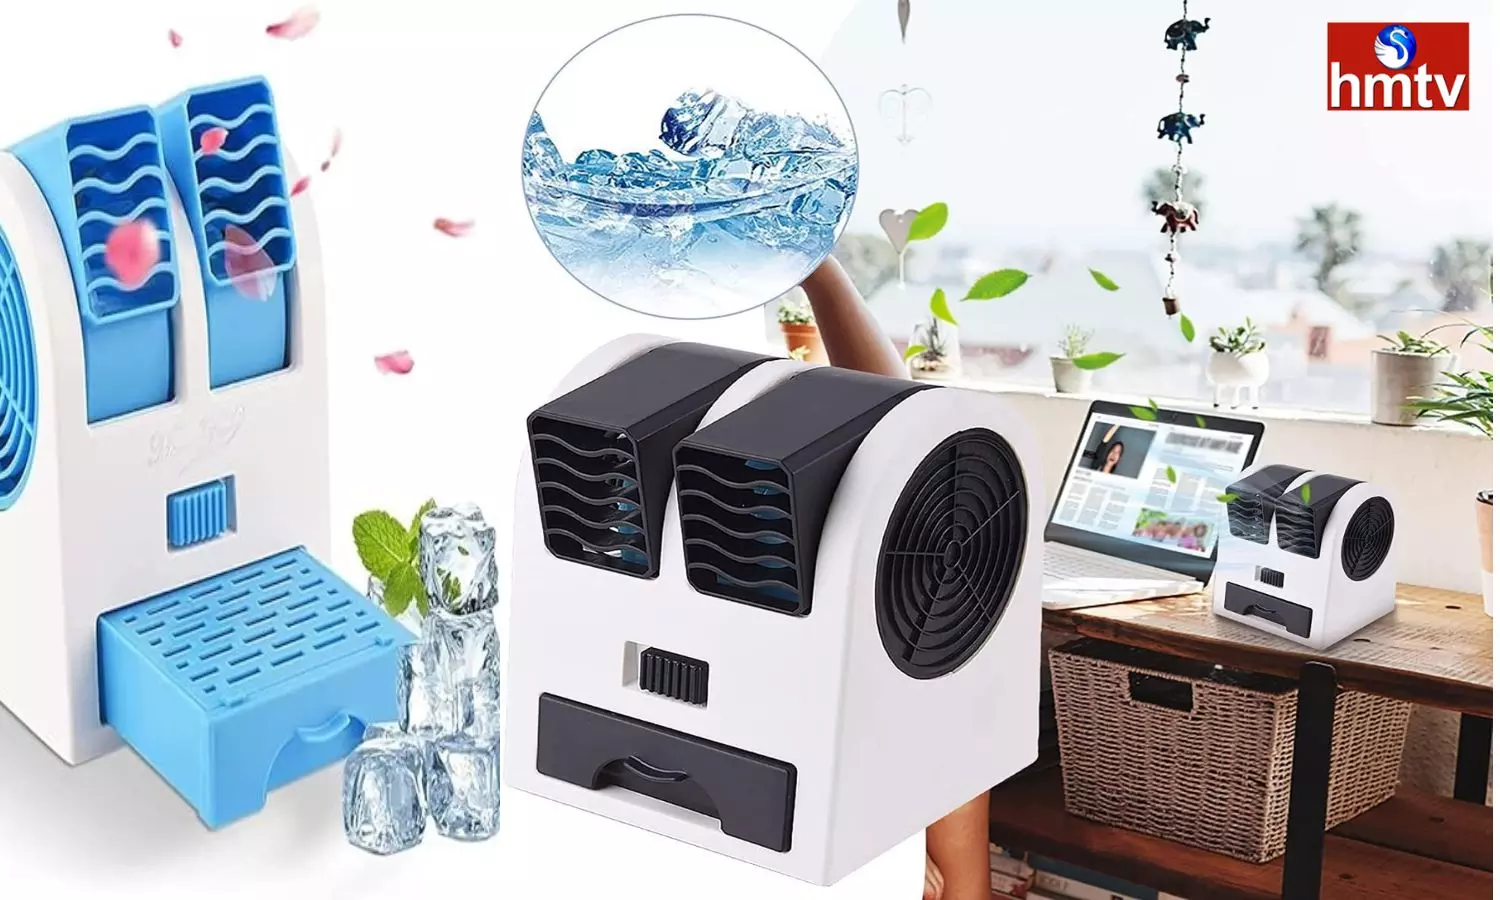 Buy Portable AC Under 500 Rupees in Amazon Check Price and Features